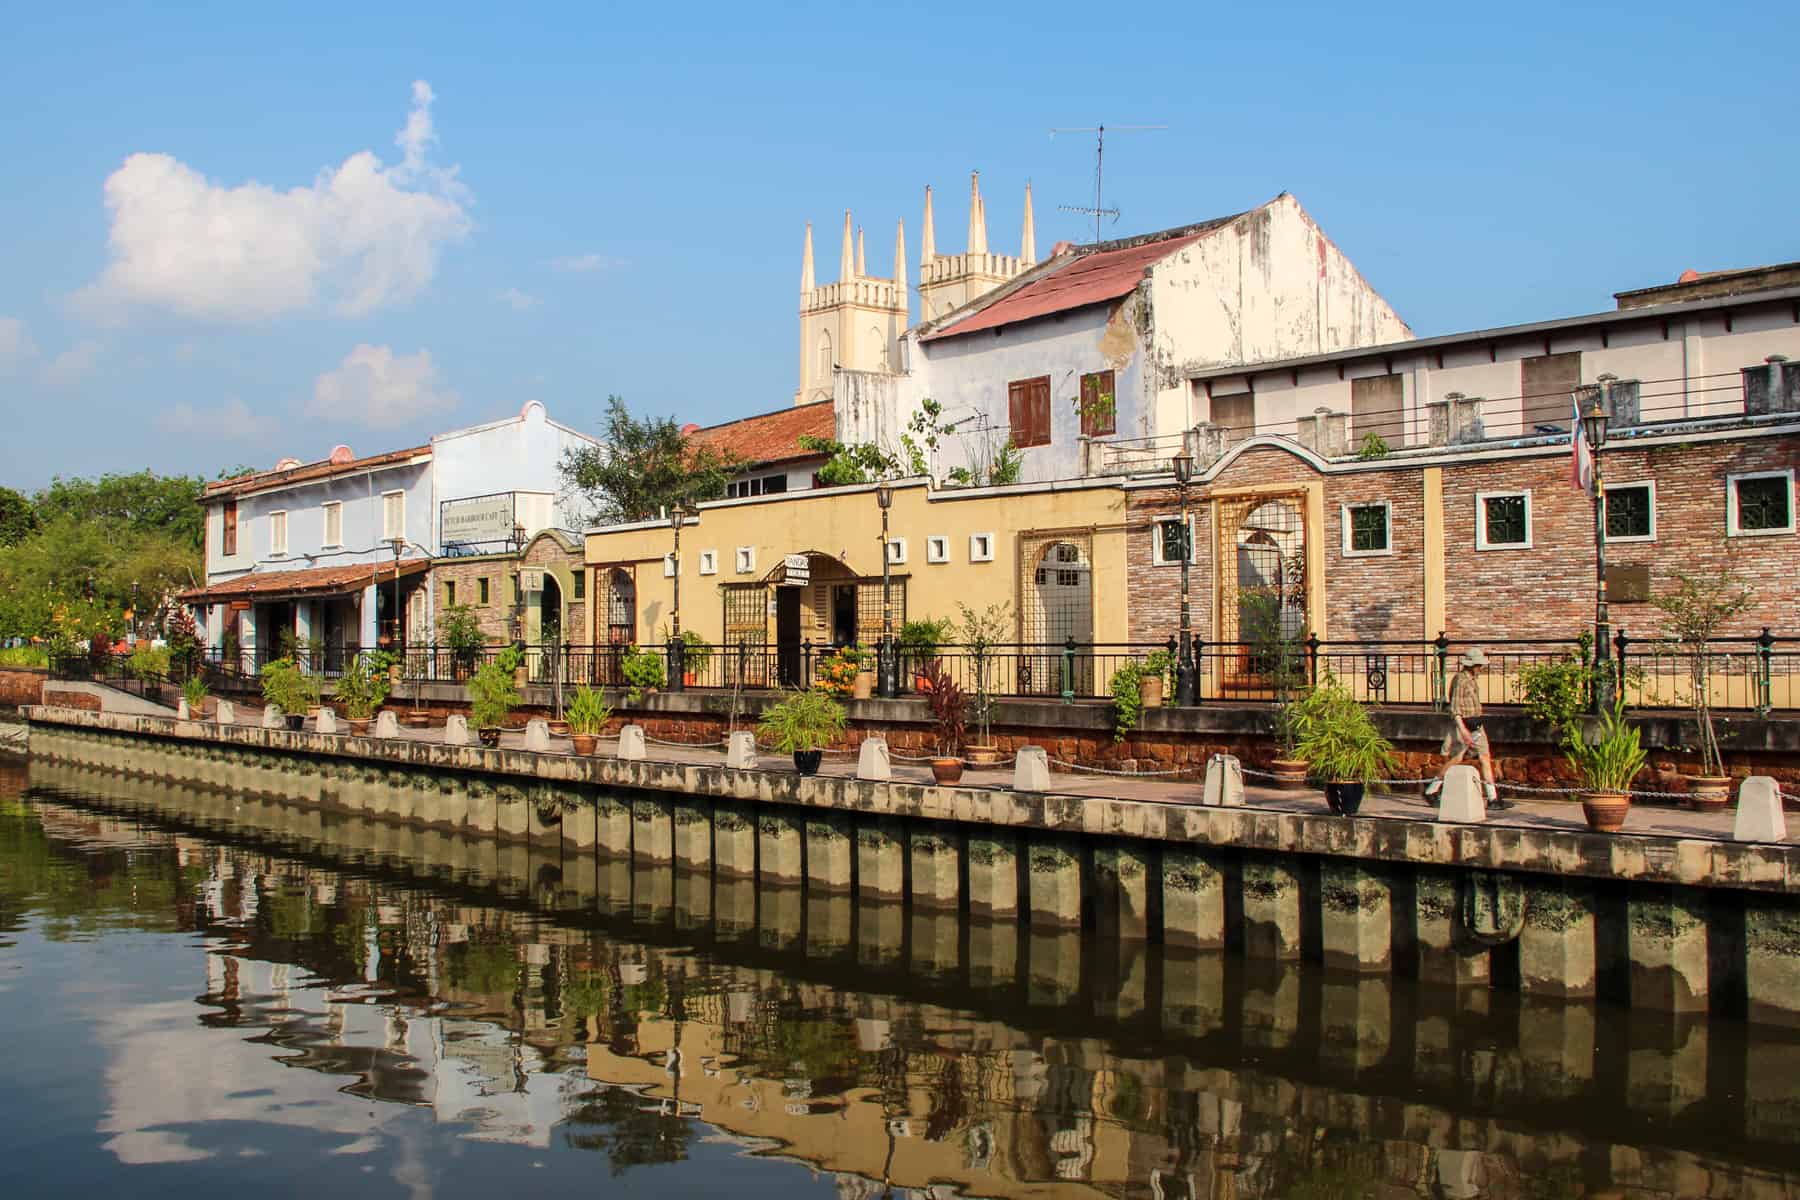 Old colonial structures line the river in Melaka, Malaysia